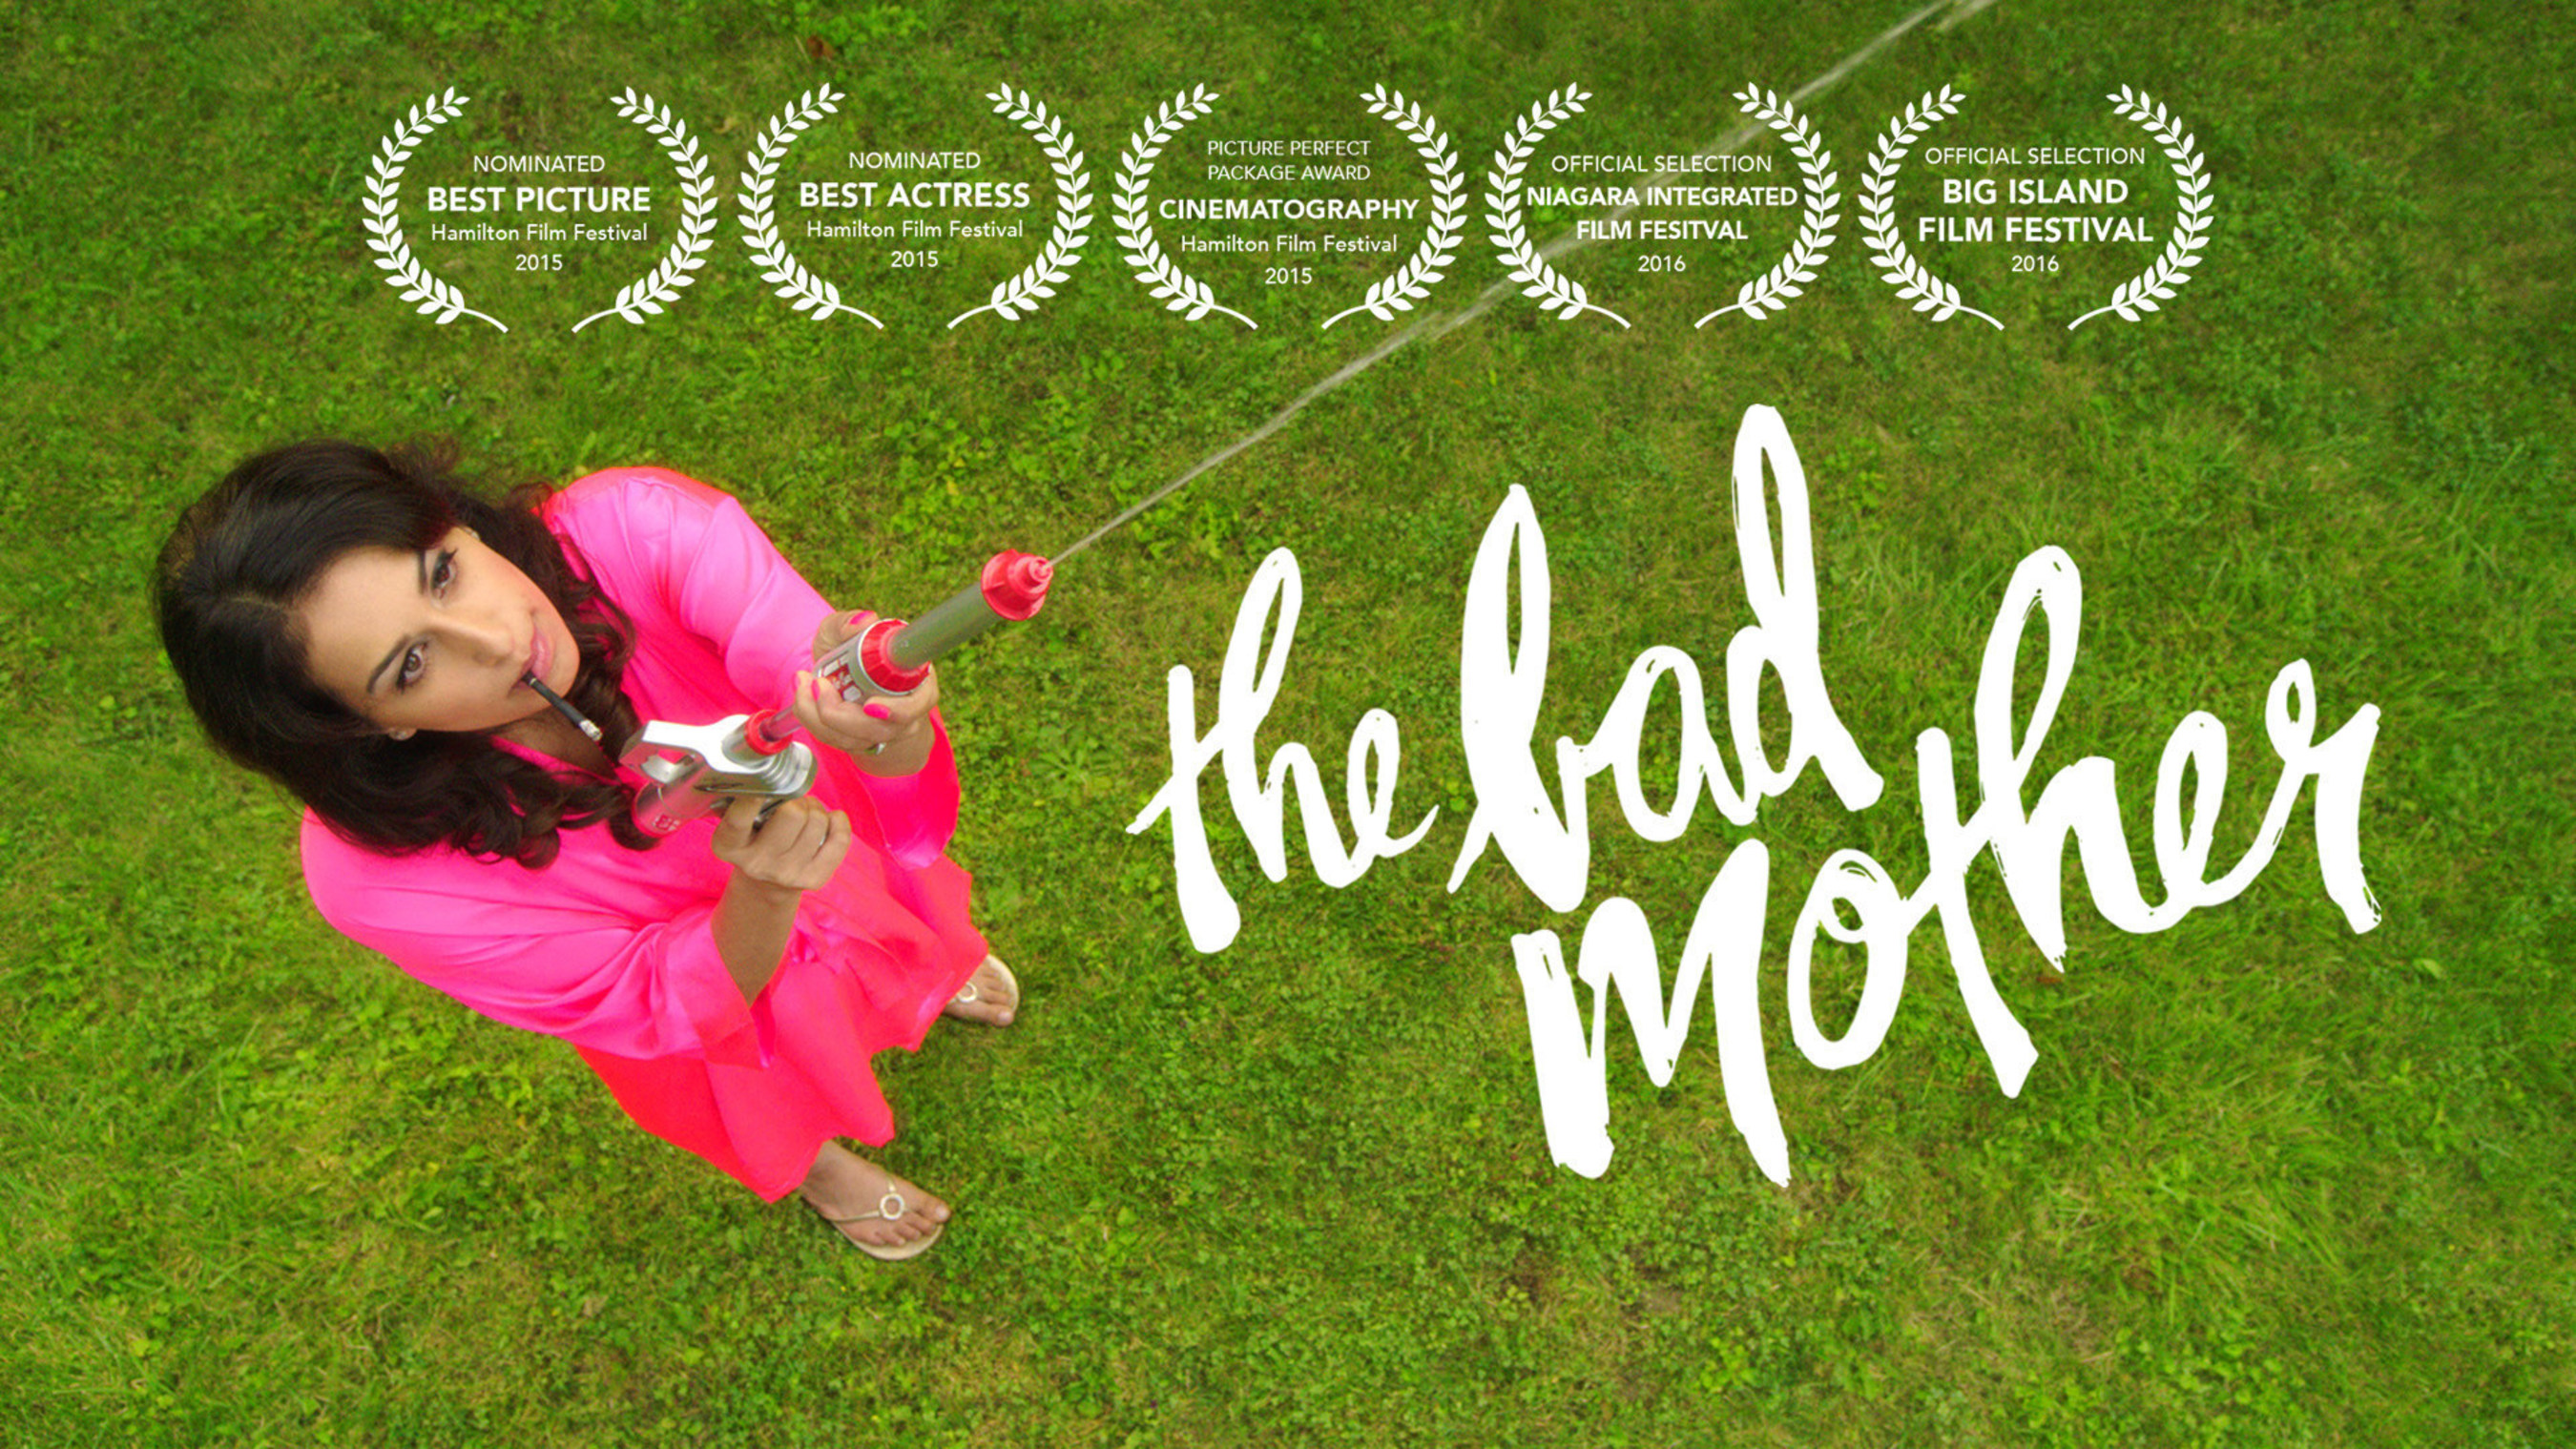 Pollinator Films Releases Indie Hit Comedy "The Bad Mother" Just in Time for Mother's Day (PRNewsFoto/Pollinator Films Inc.)